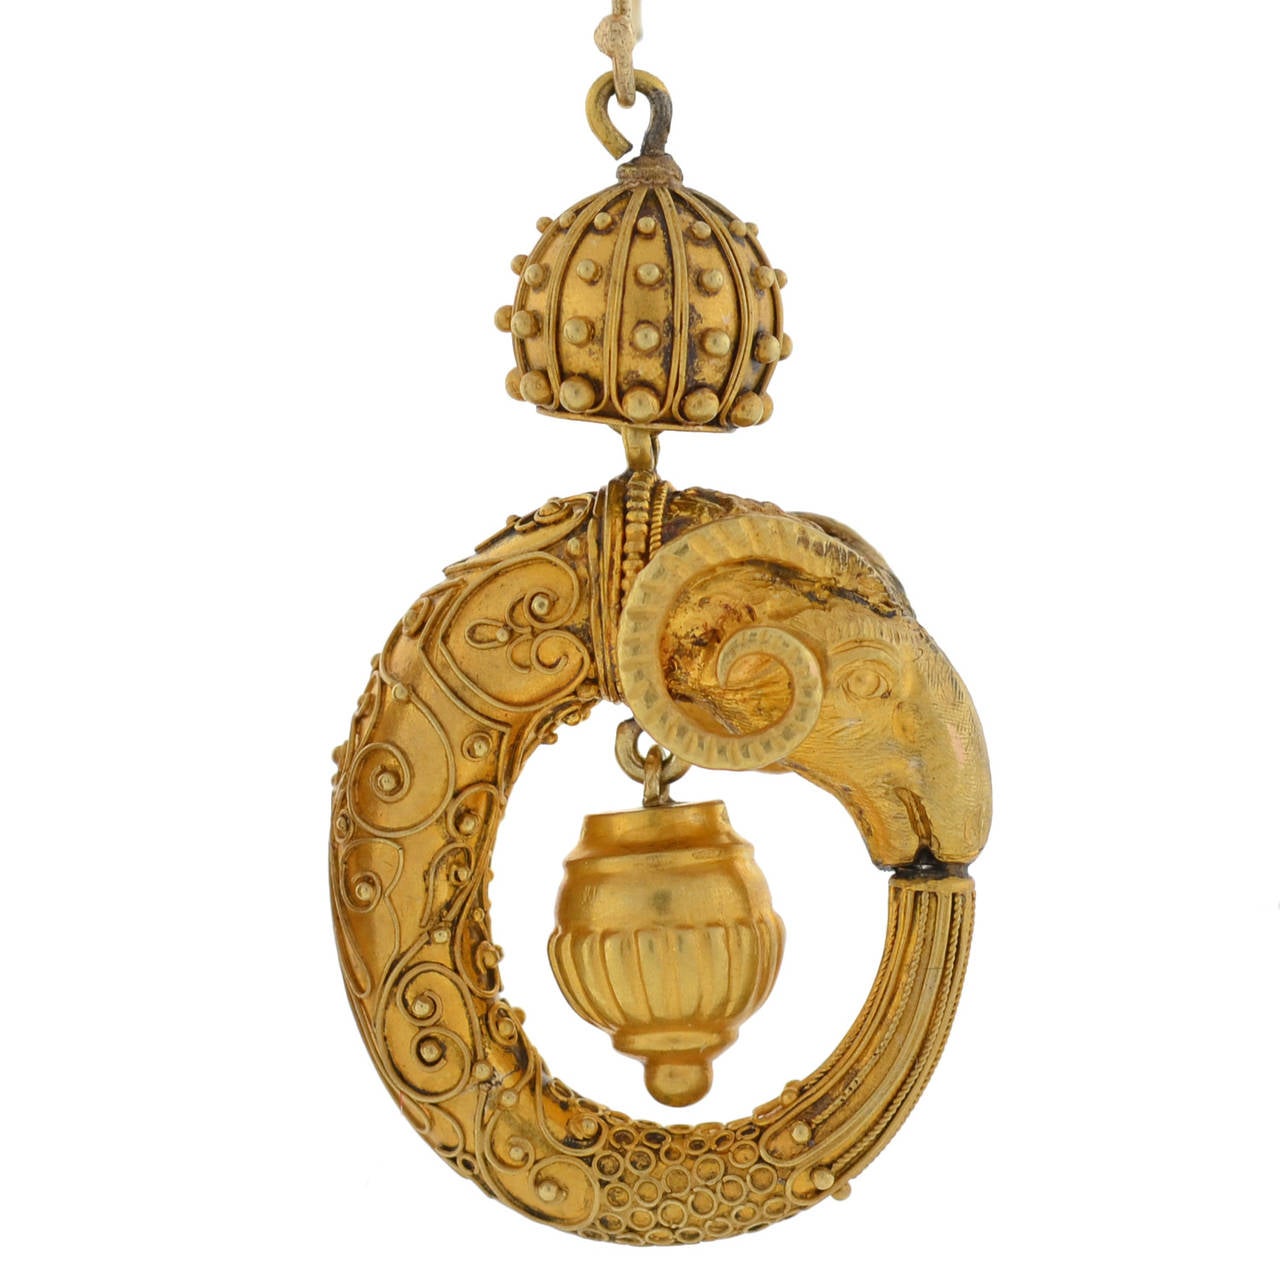 A truly exceptional pair of gold ram's head earrings from the Victorian (ca1880) era! Made of vibrant 15kt yellow gold, the earrings have an elaborate handmade design. Each earring is comprised of an impeccably detailed three-dimensional ram's head,